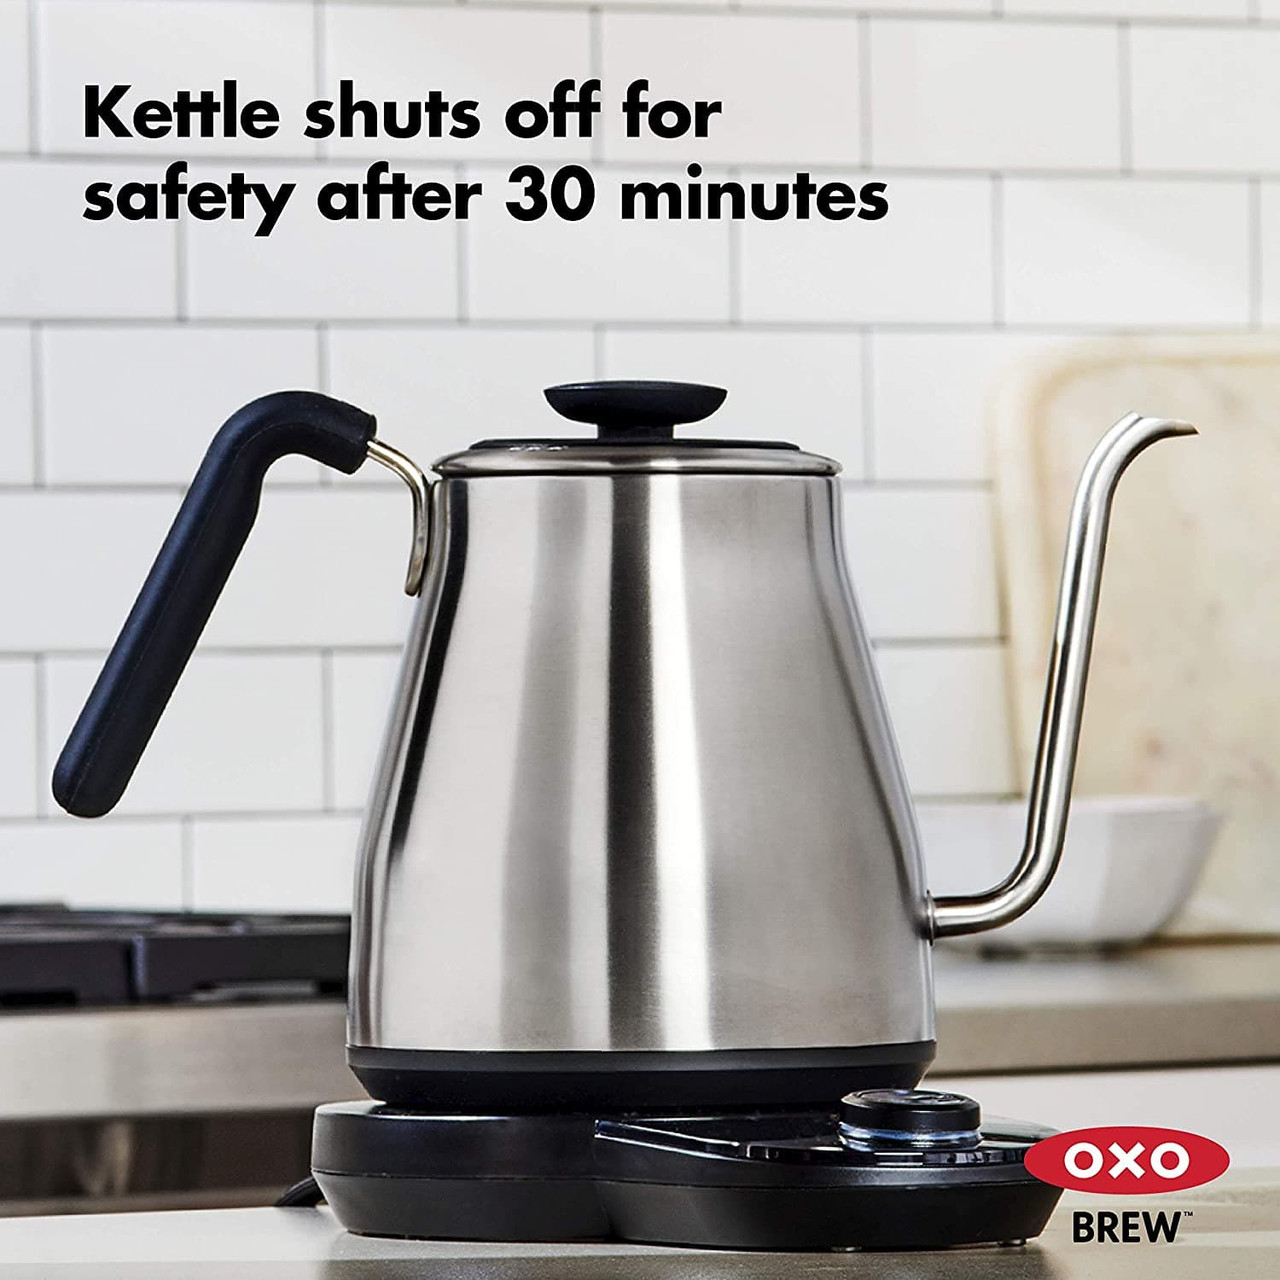 https://cdn11.bigcommerce.com/s-hccytny0od/images/stencil/1280x1280/products/3998/14648/oxo-brew-adjustable-temperature-pour-over-kettle-5__25672.1618134444.jpg?c=2?imbypass=on